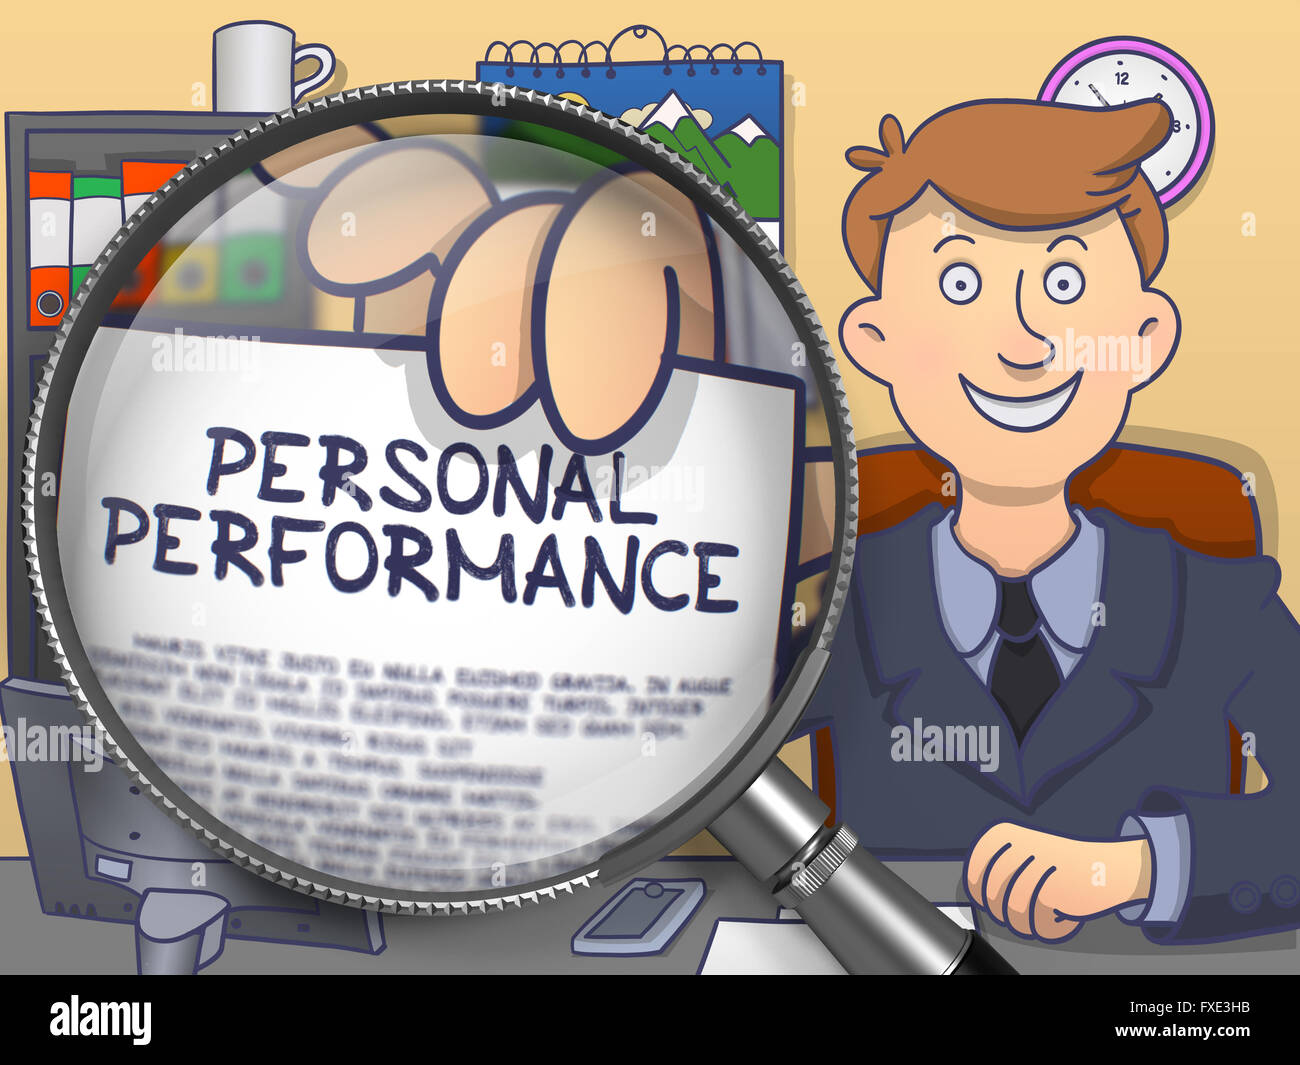 Personal Performance through Lens. Doodle Style. Stock Photo